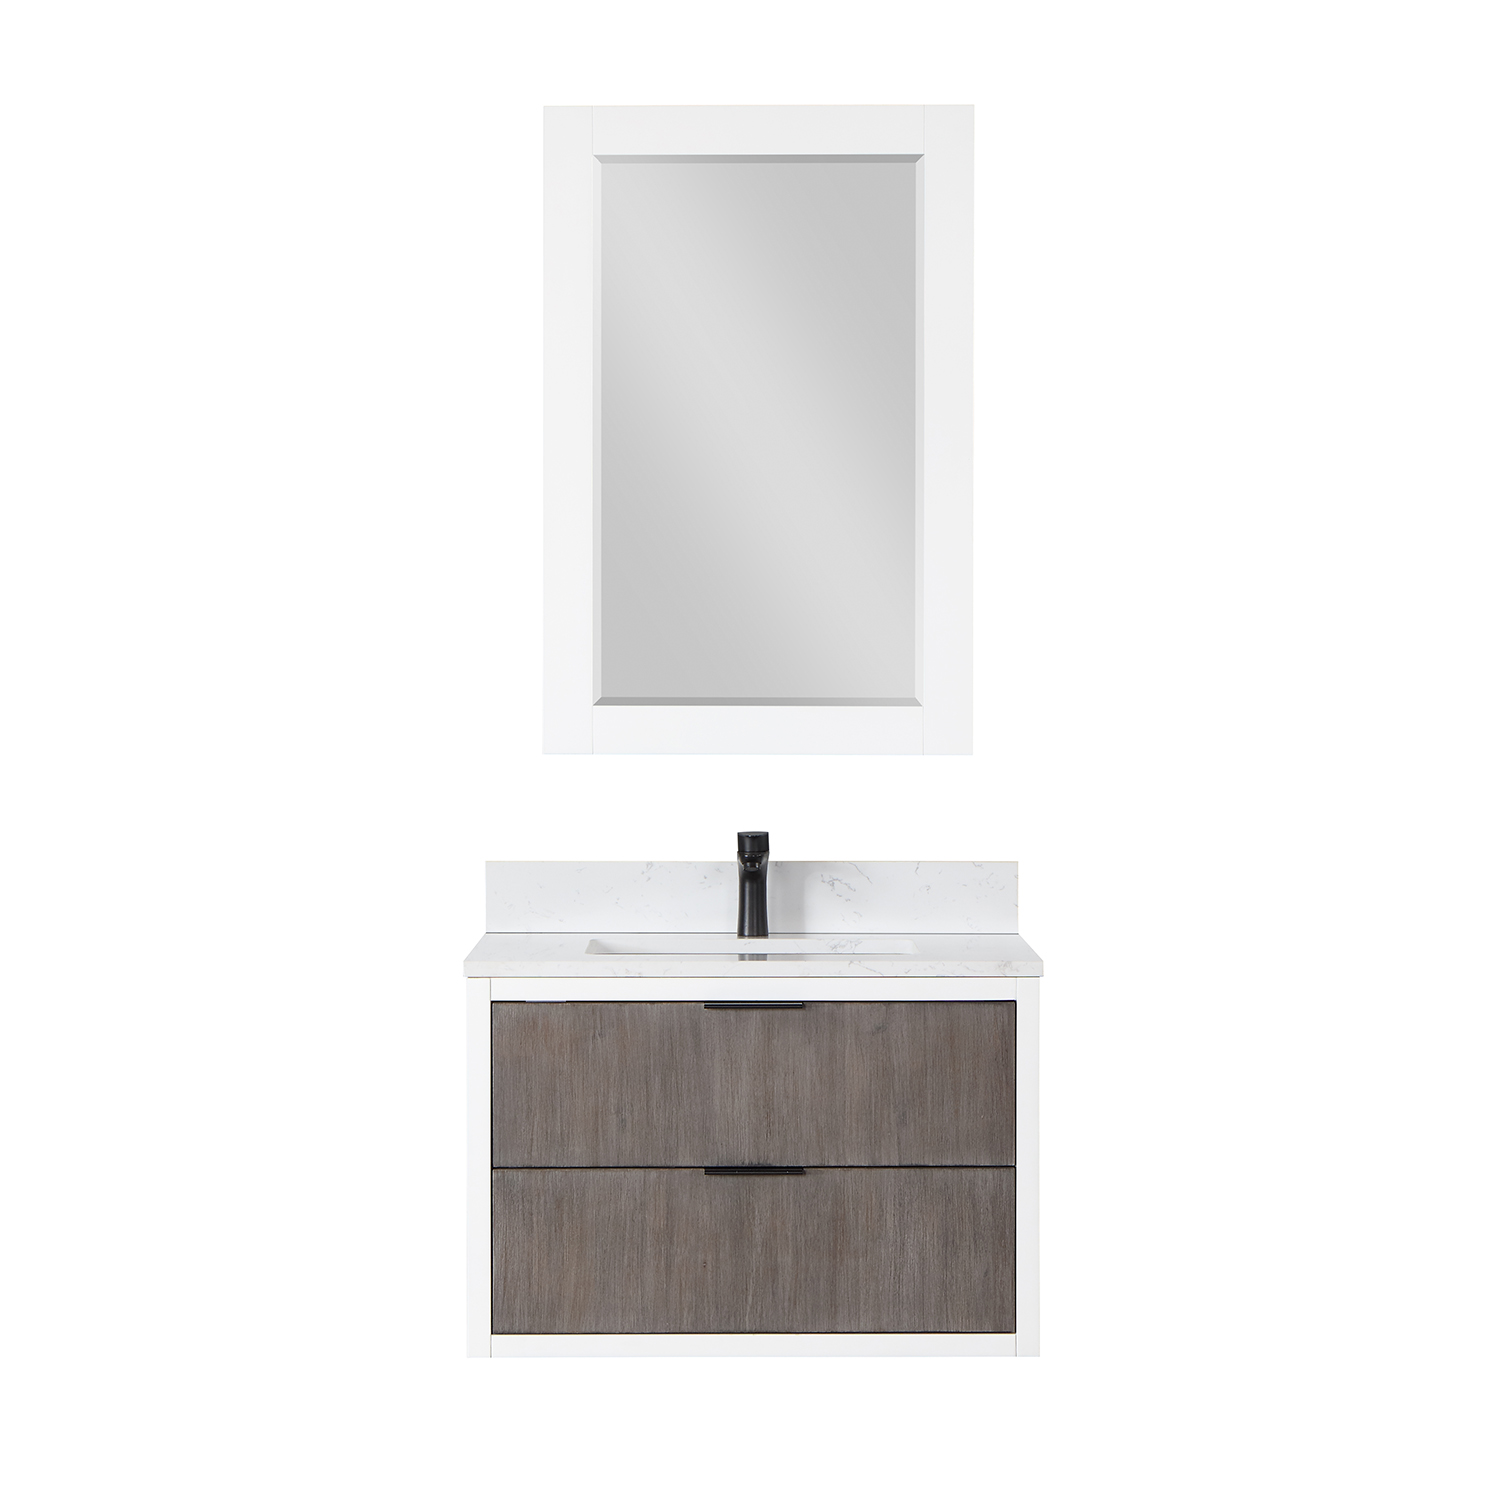 Issac Edwards Collection 30" Single Bathroom Vanity in Classical Gray with Carrara White Composite Stone Countertop without Mirror 